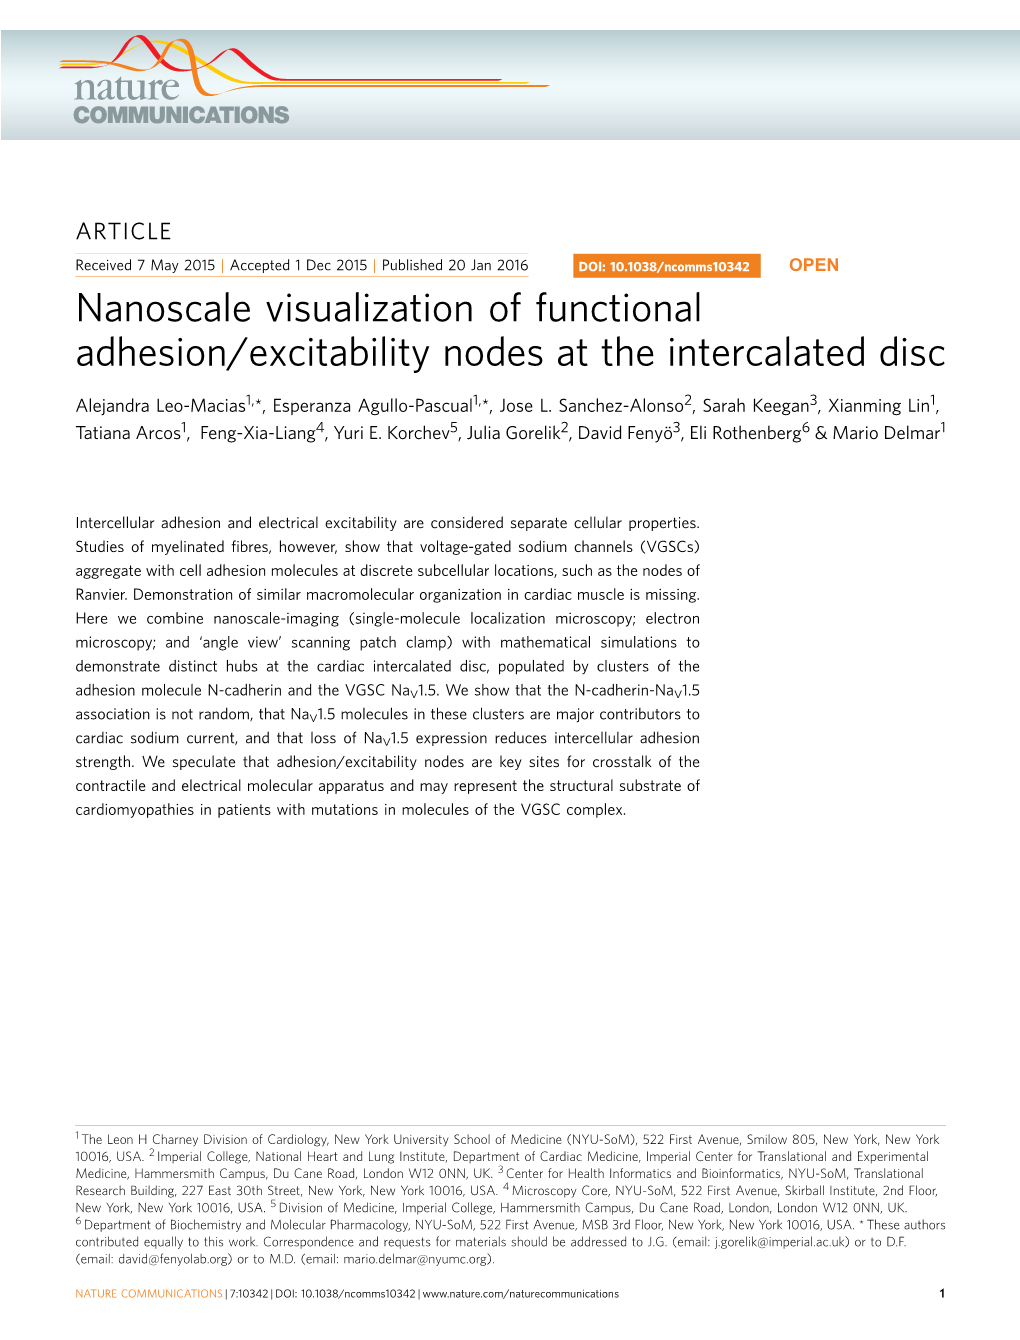 Nanoscale Visualization of Functional Adhesion/Excitability Nodes at the Intercalated Disc